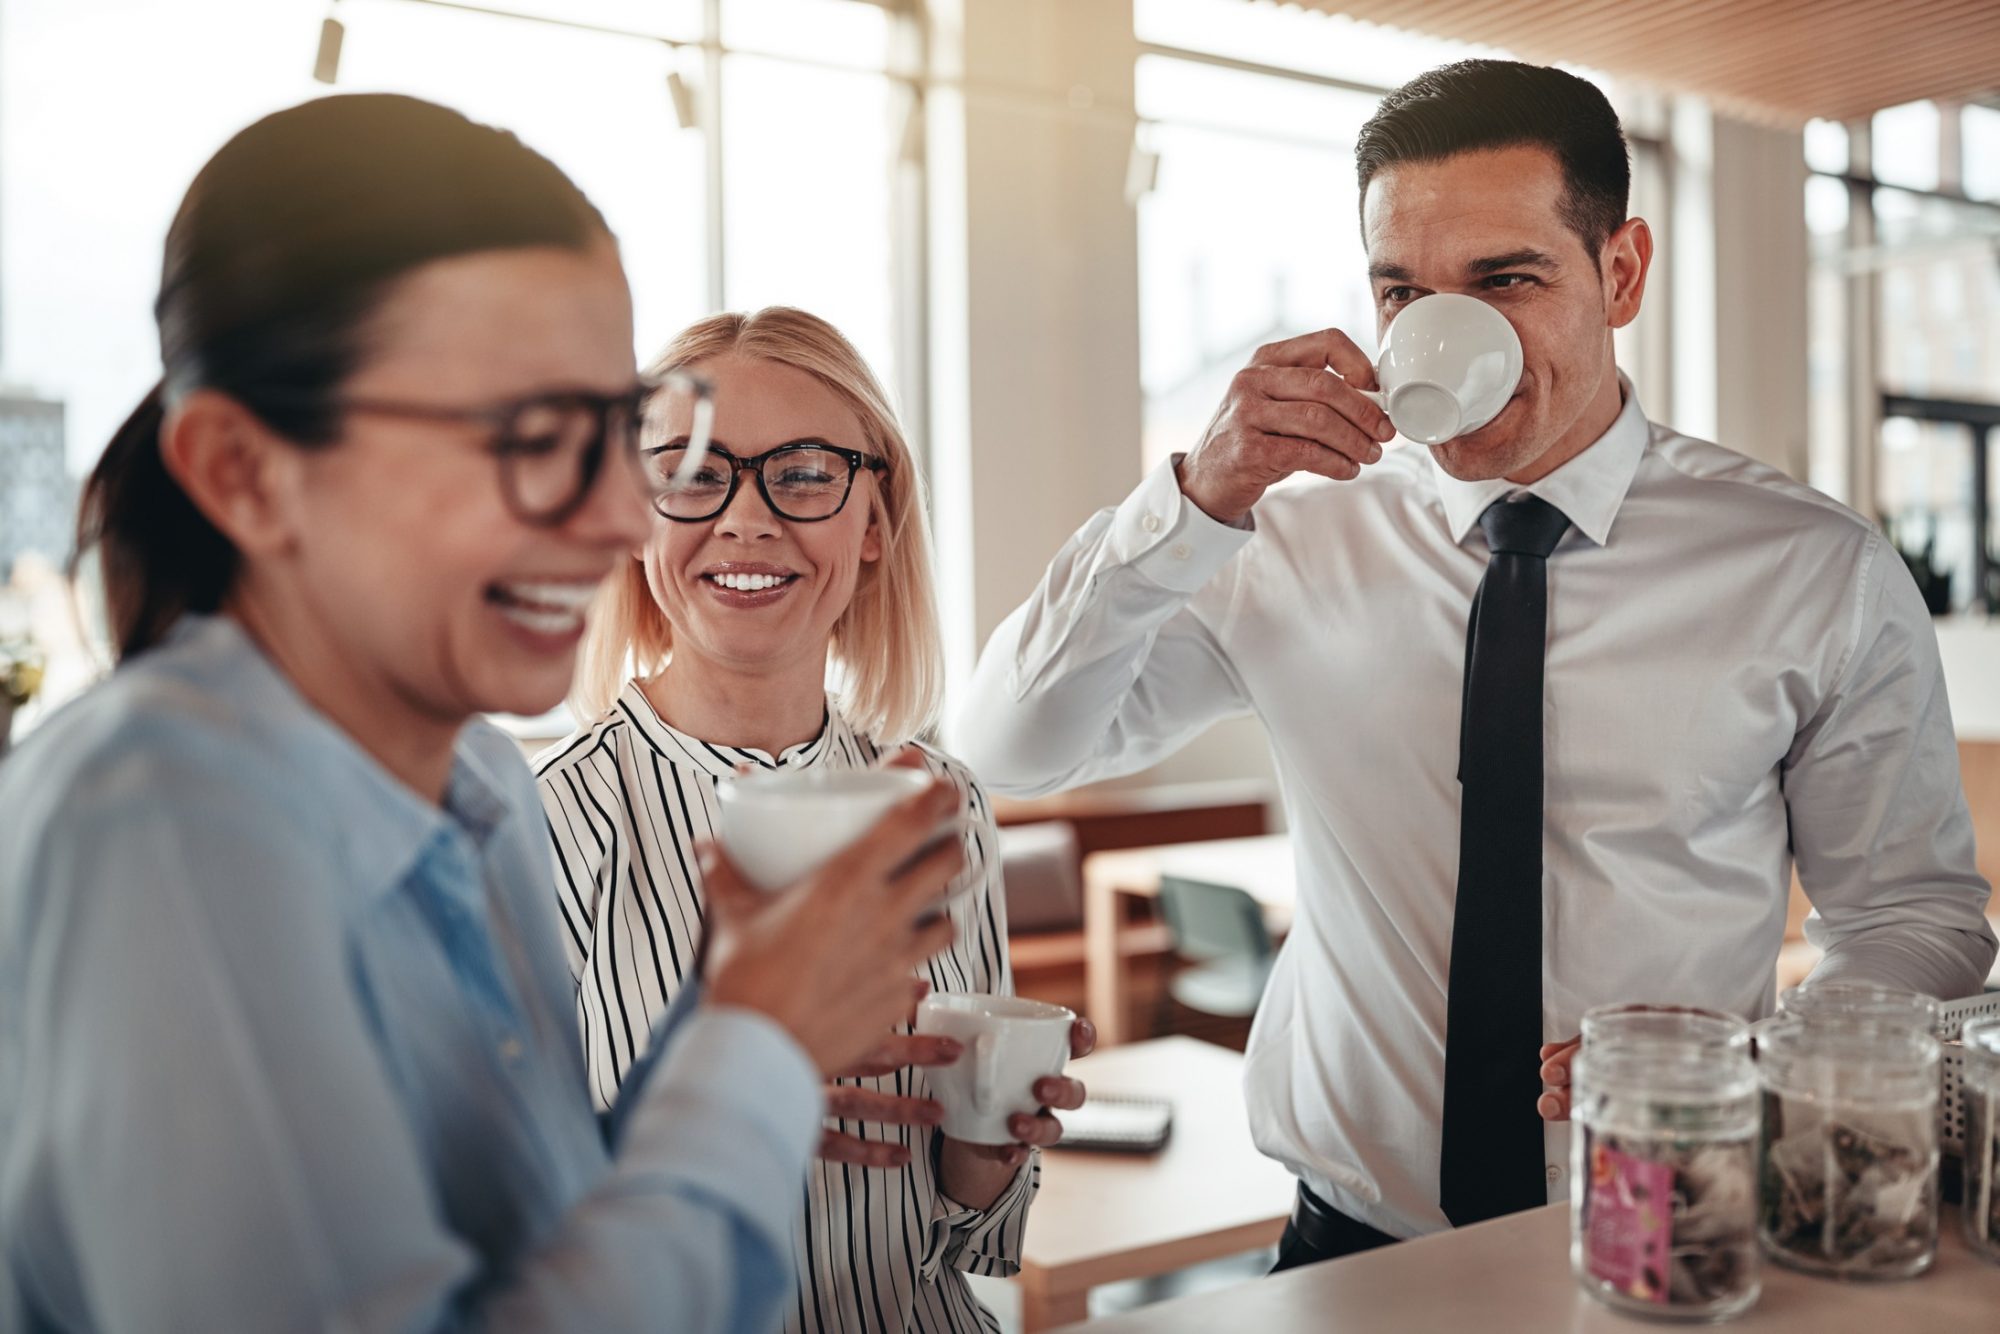 Phoenix Office Coffee Services | Workplace Culture | Employee Benefit